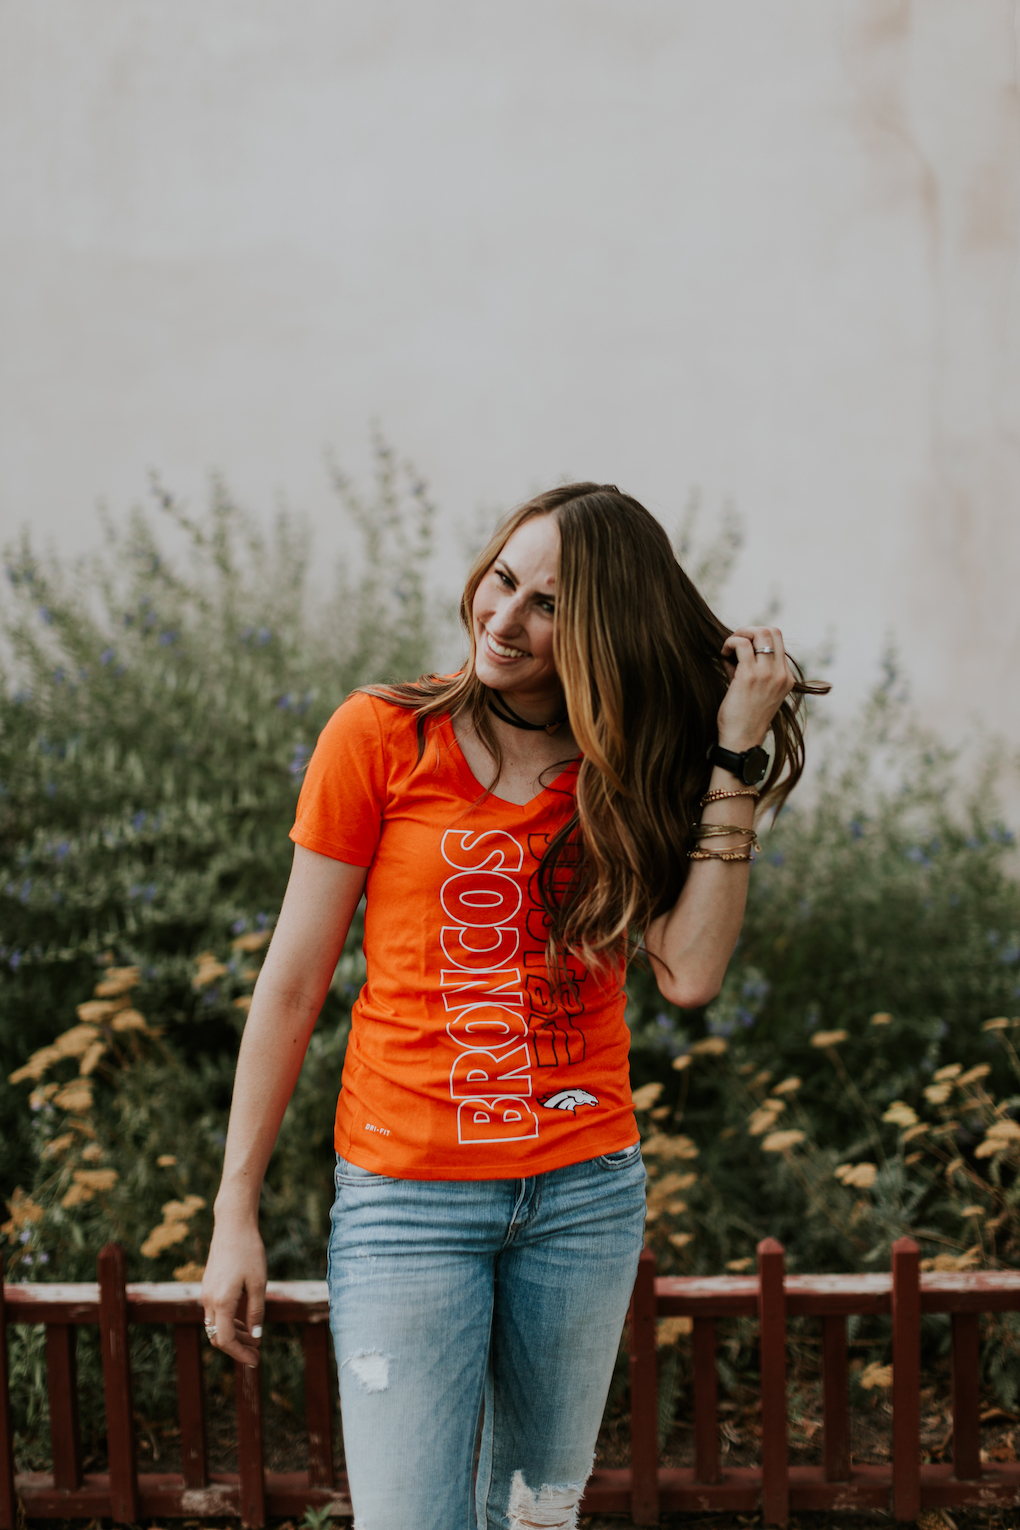 Womens NFL Broncos T-Shirt girl wearing bright orange Broncos Tee shirt with brown curled hair and skinny distressed denim